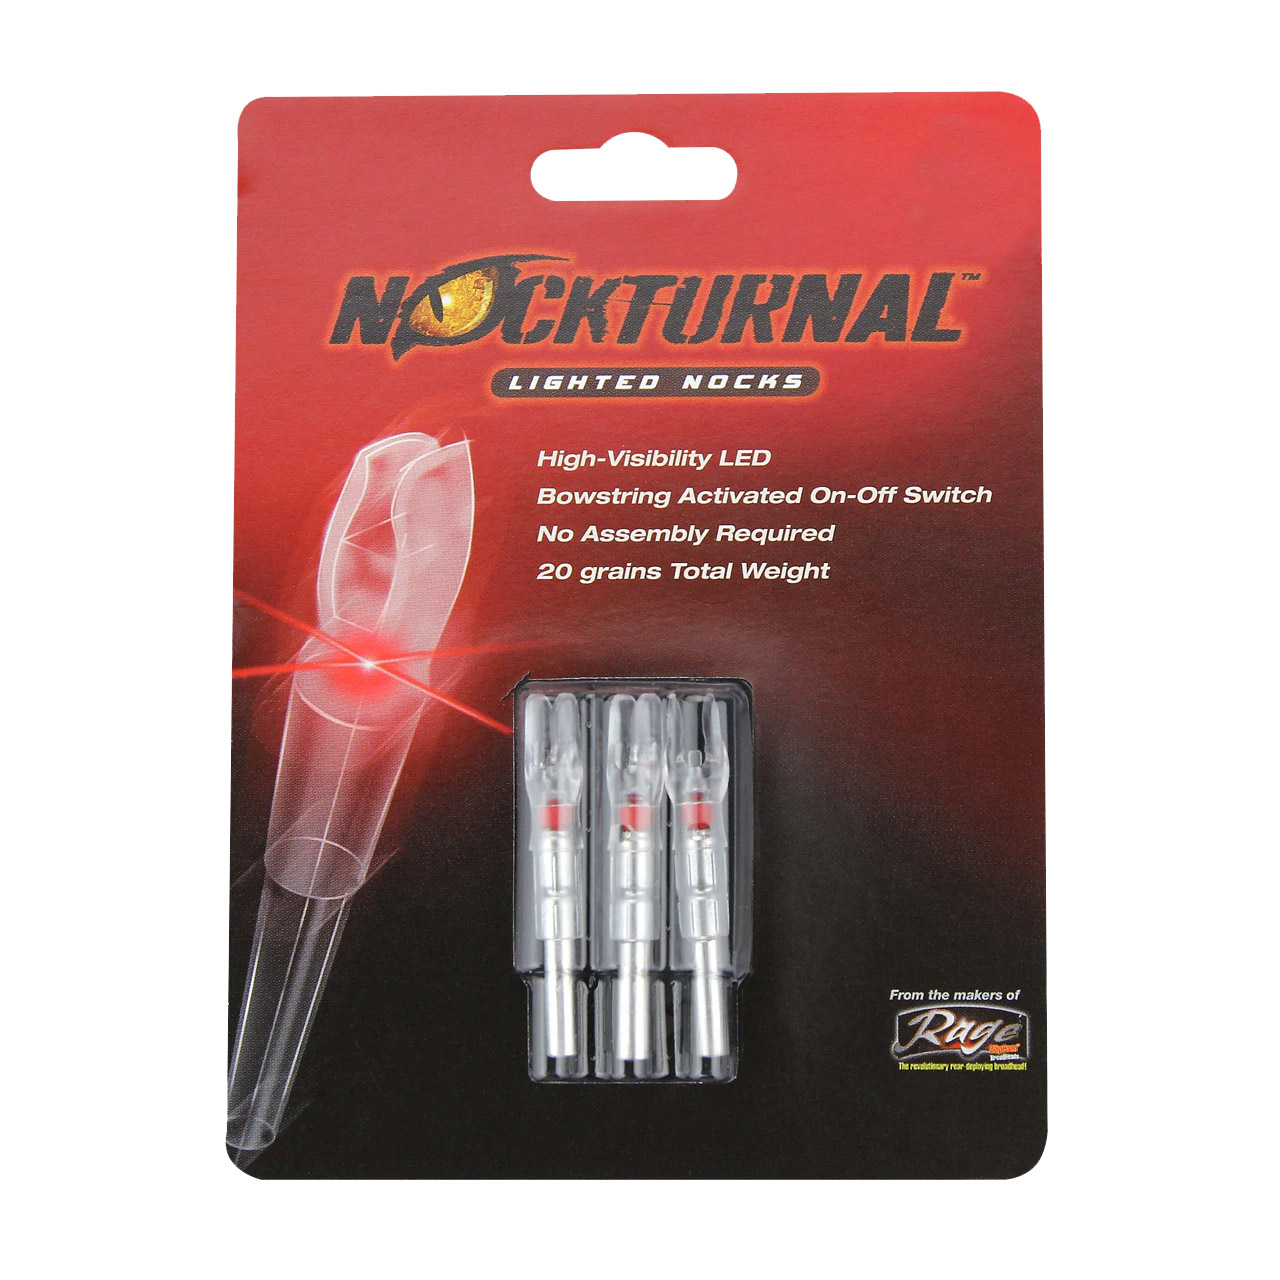 Nockturnal-G Lighted Nock for Arrows with .165 Inside Diameter Including Victory 